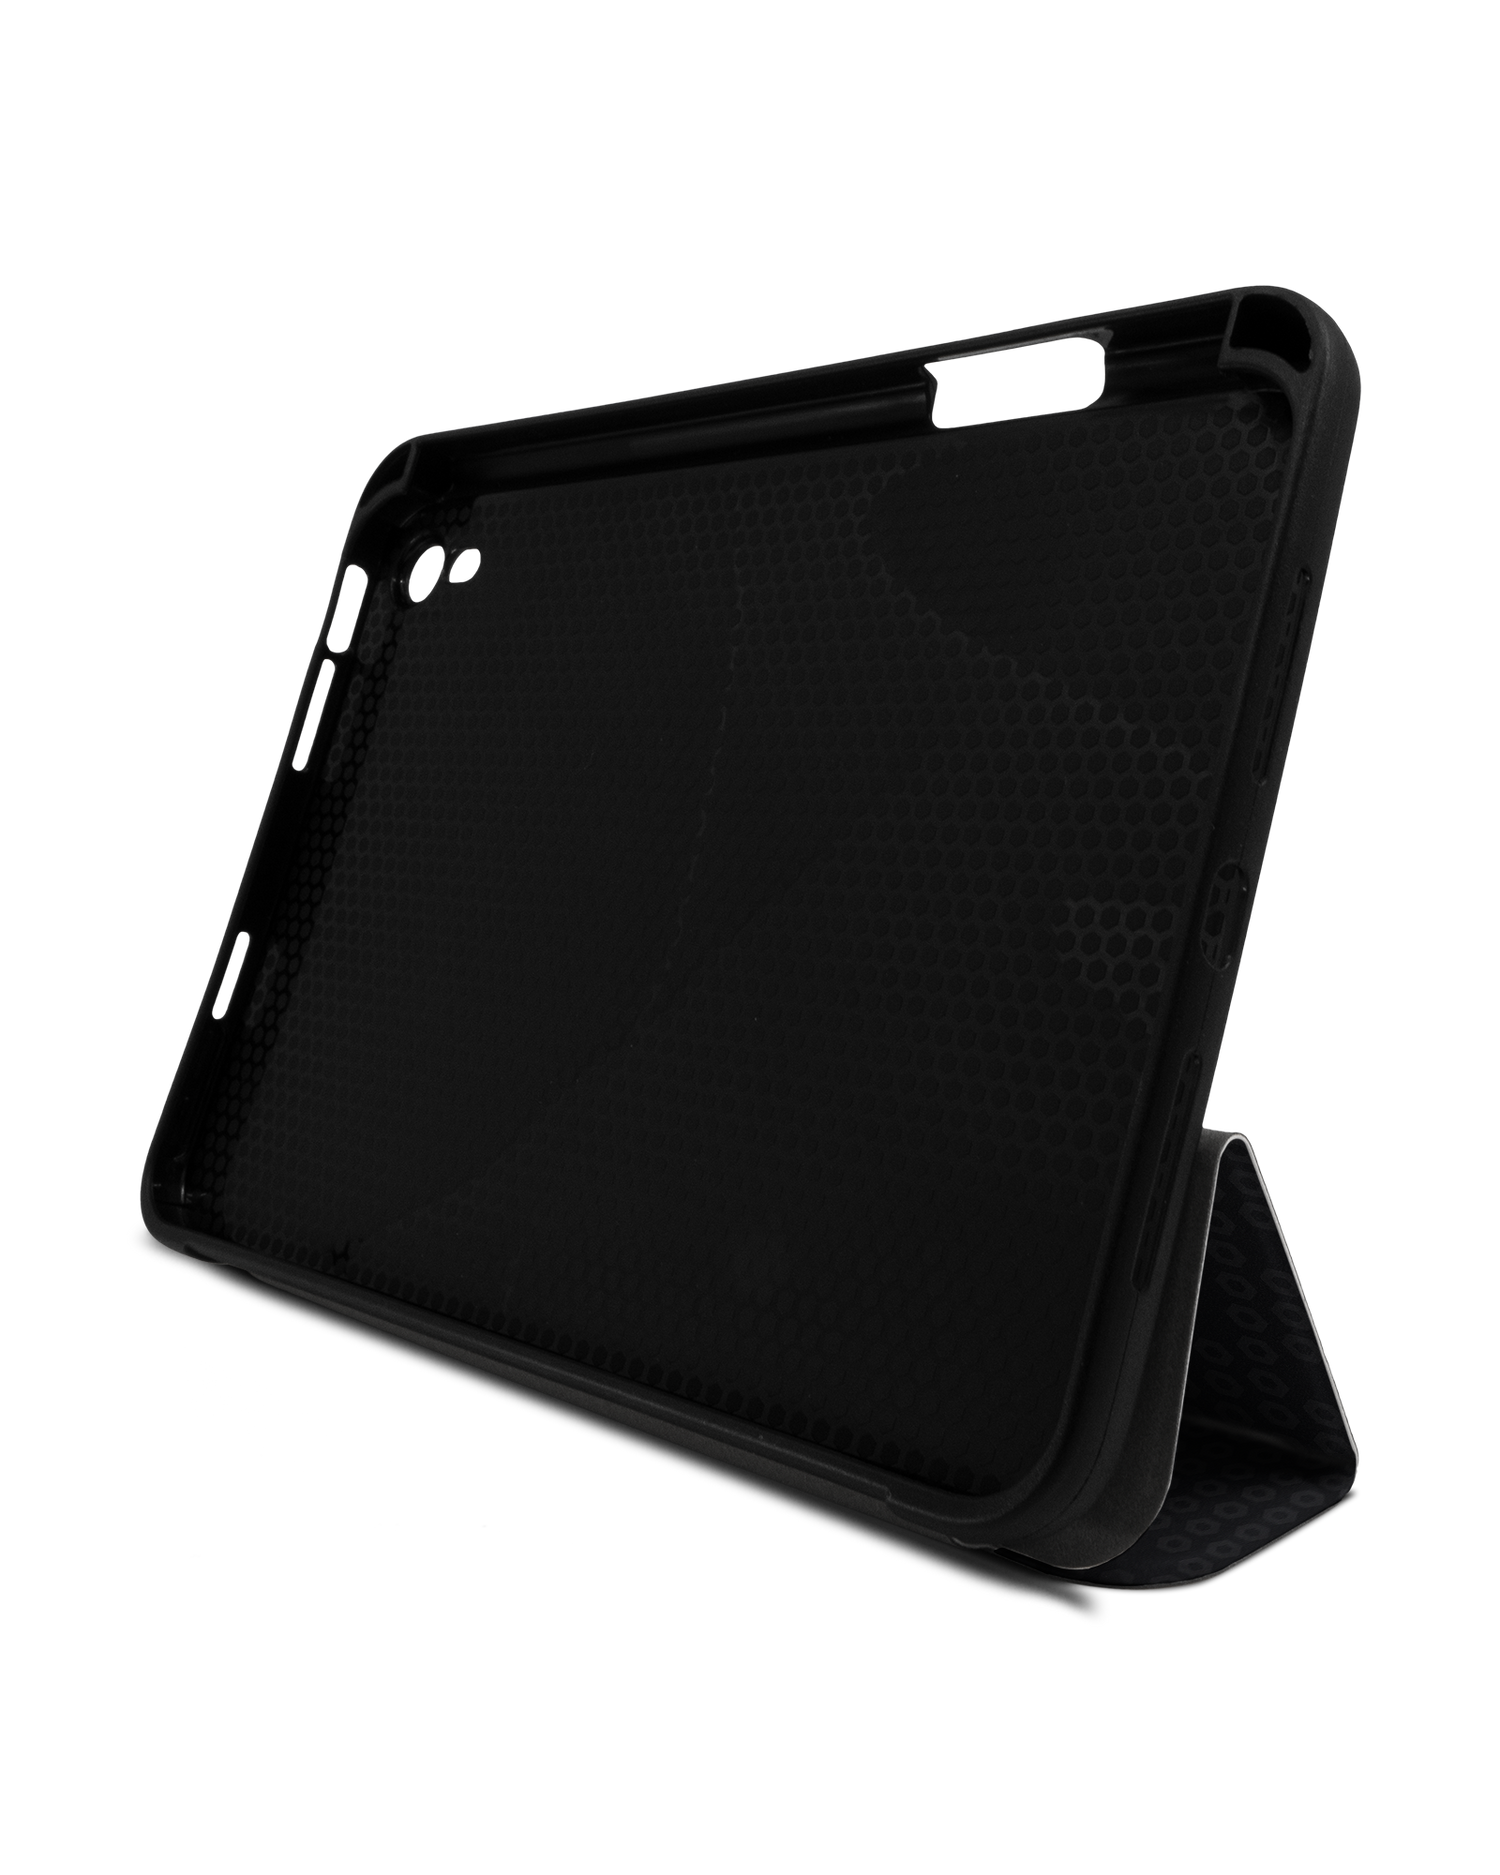 Spec Ops Dark iPad Case with Pencil Holder Apple iPad mini 6 (2021): Set up in landscape format (front view)